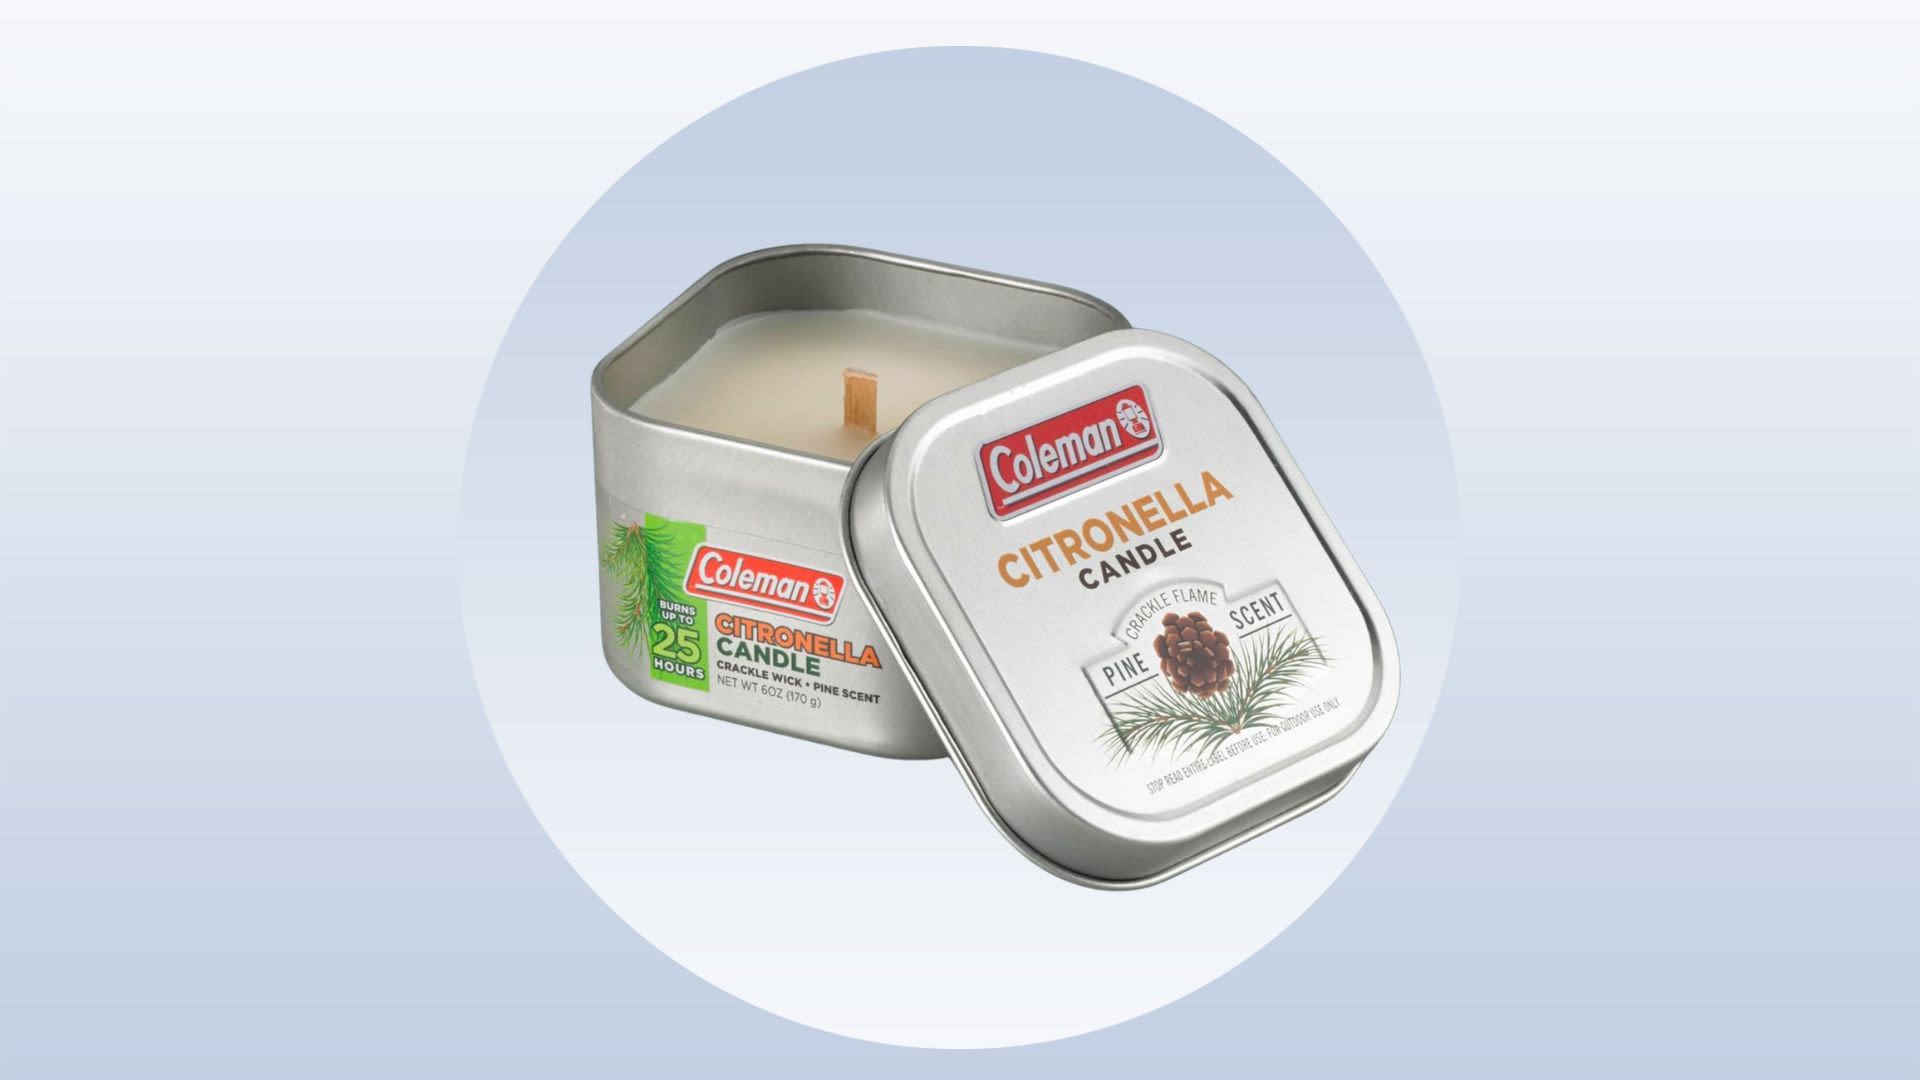 Bugs begone: Stock up on Coleman's bestselling citronella candle while it's $4